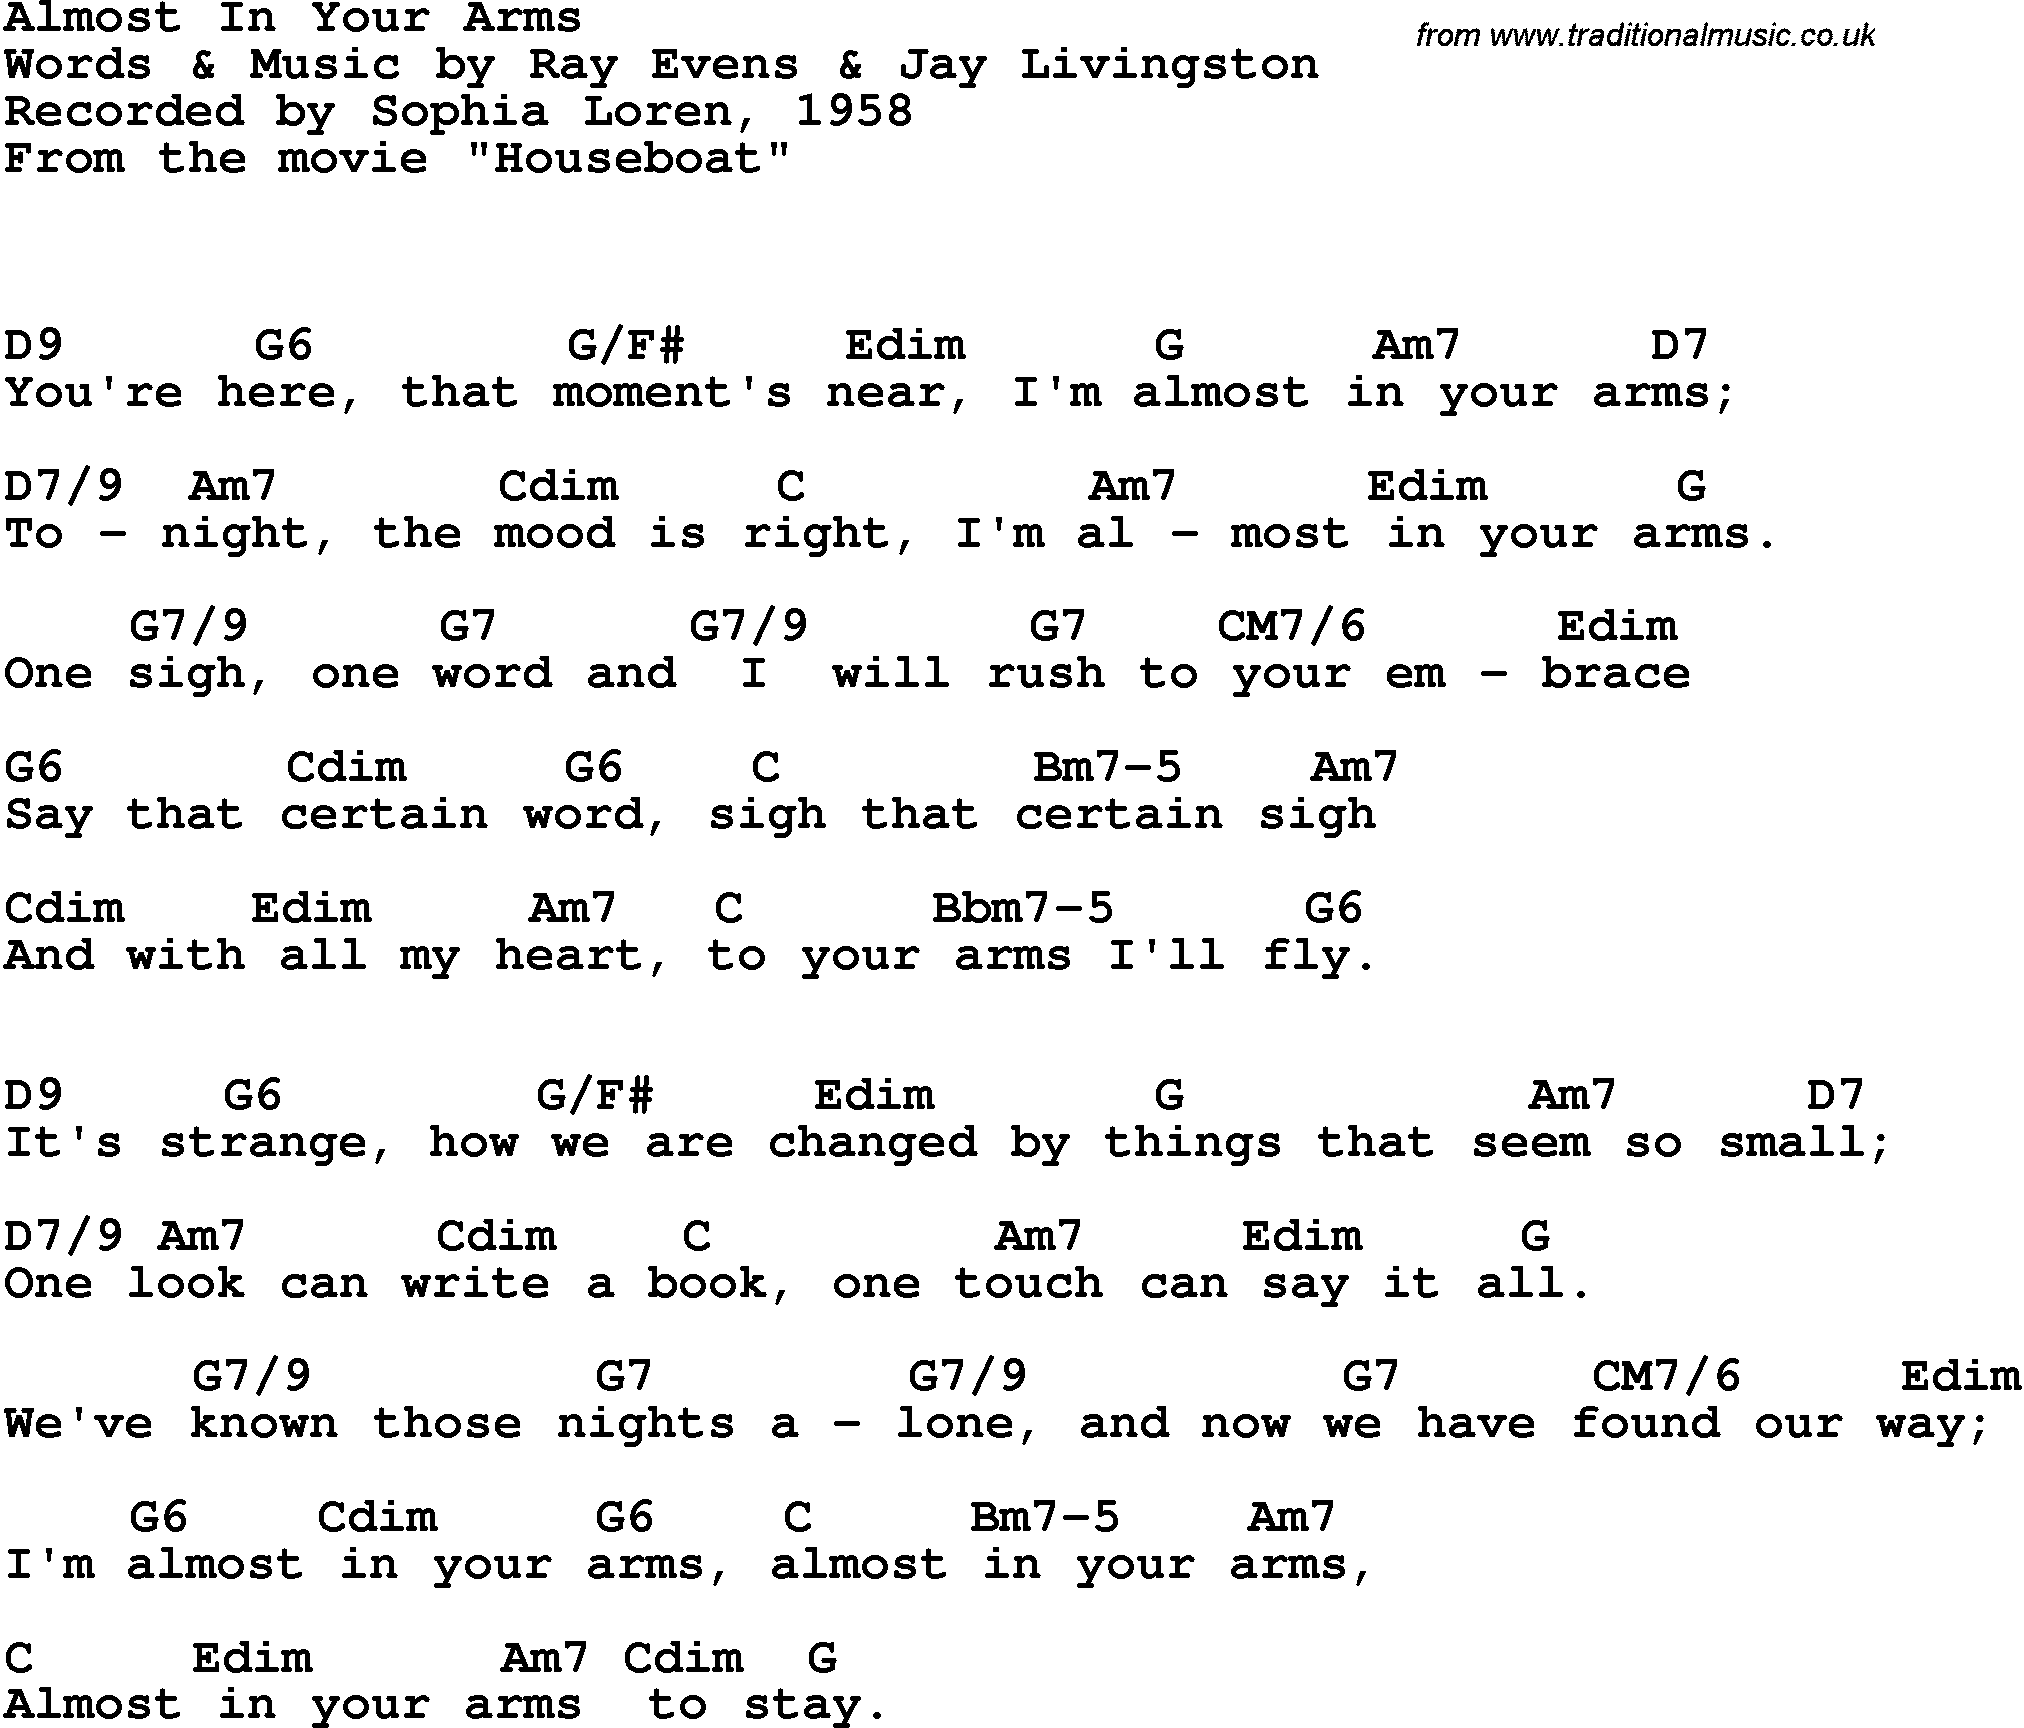 Song Lyrics with guitar chords for Almost In Your Arms - Sophia Loren, 1958